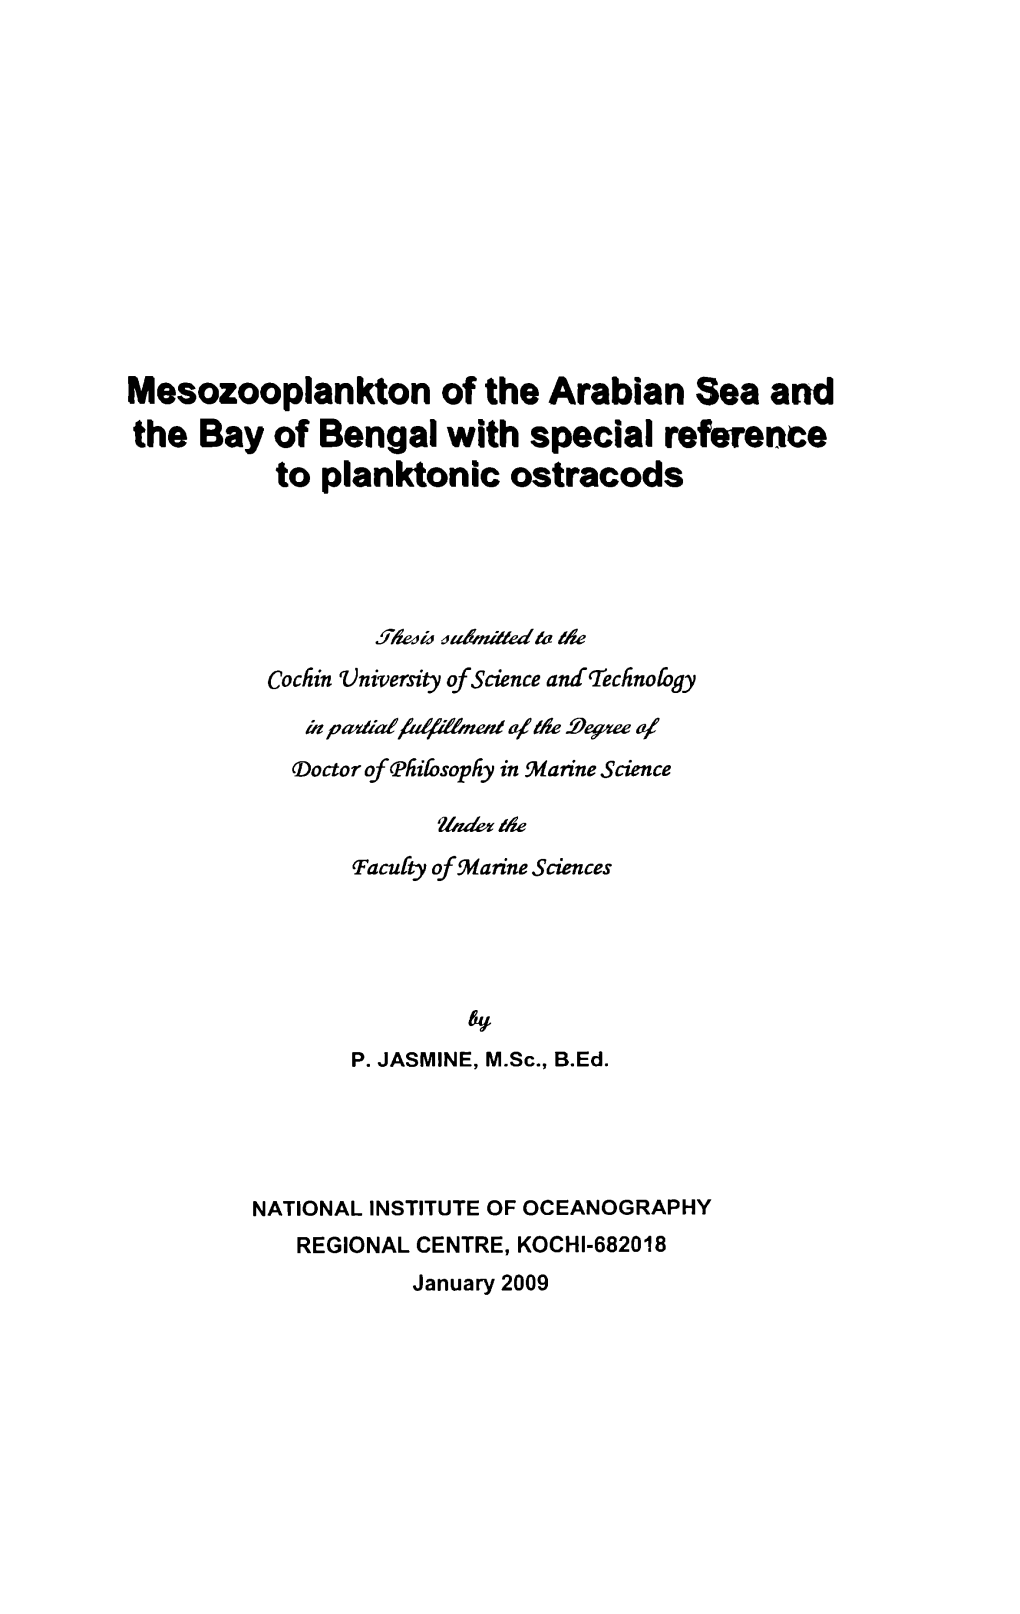 Mesozooplankton of the Arabian Sea and the Bay of Bengal with Special Reference to Planktonic Ostracods